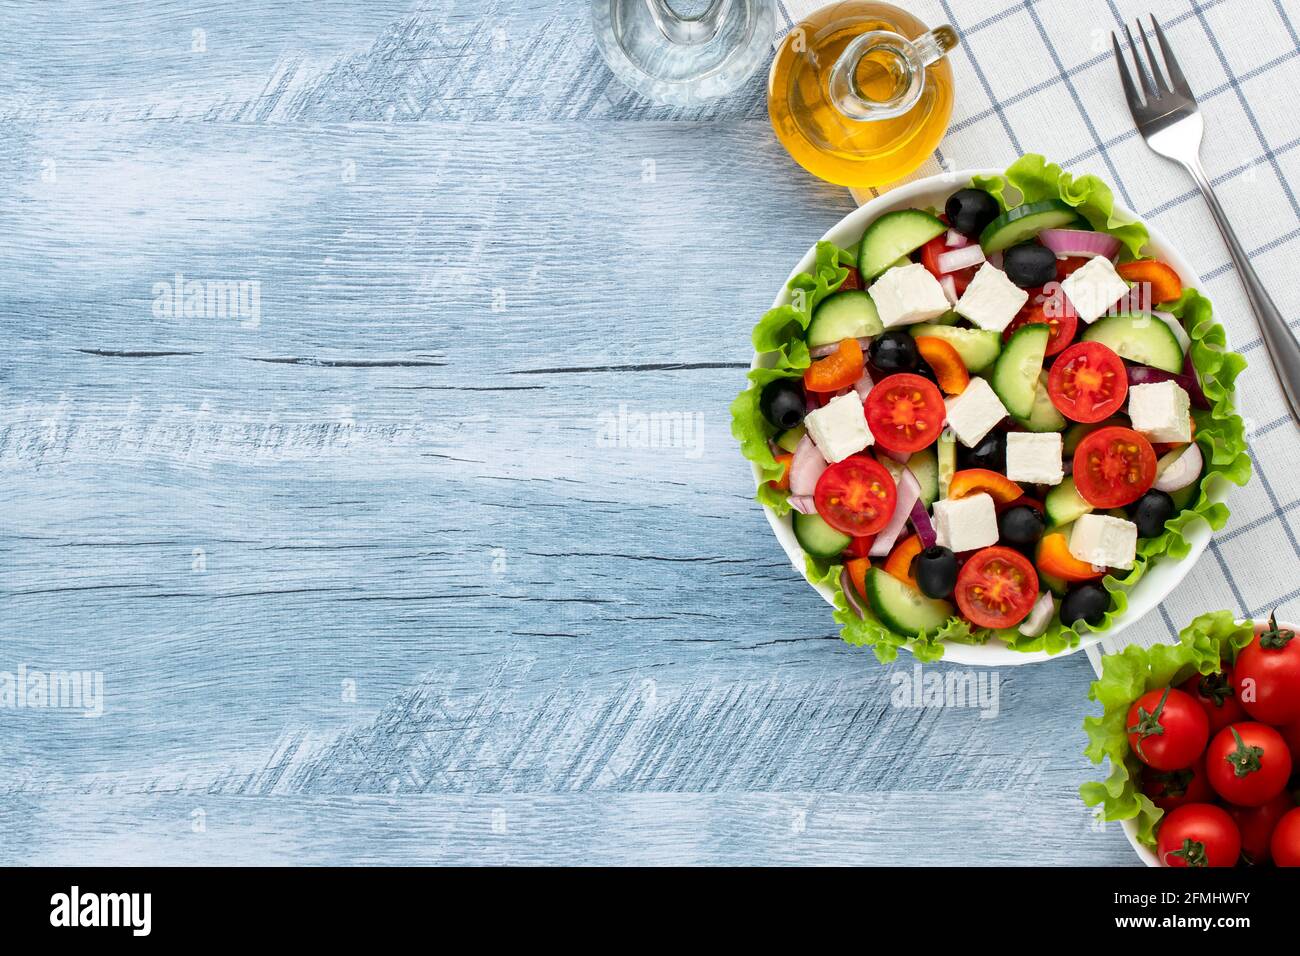 Greek salad or horiatiki salad made with pieces of tomatoes, cucumbers, onion, feta cheese, bell pepper slices, olives and dressed with olive oil. Hea Stock Photo